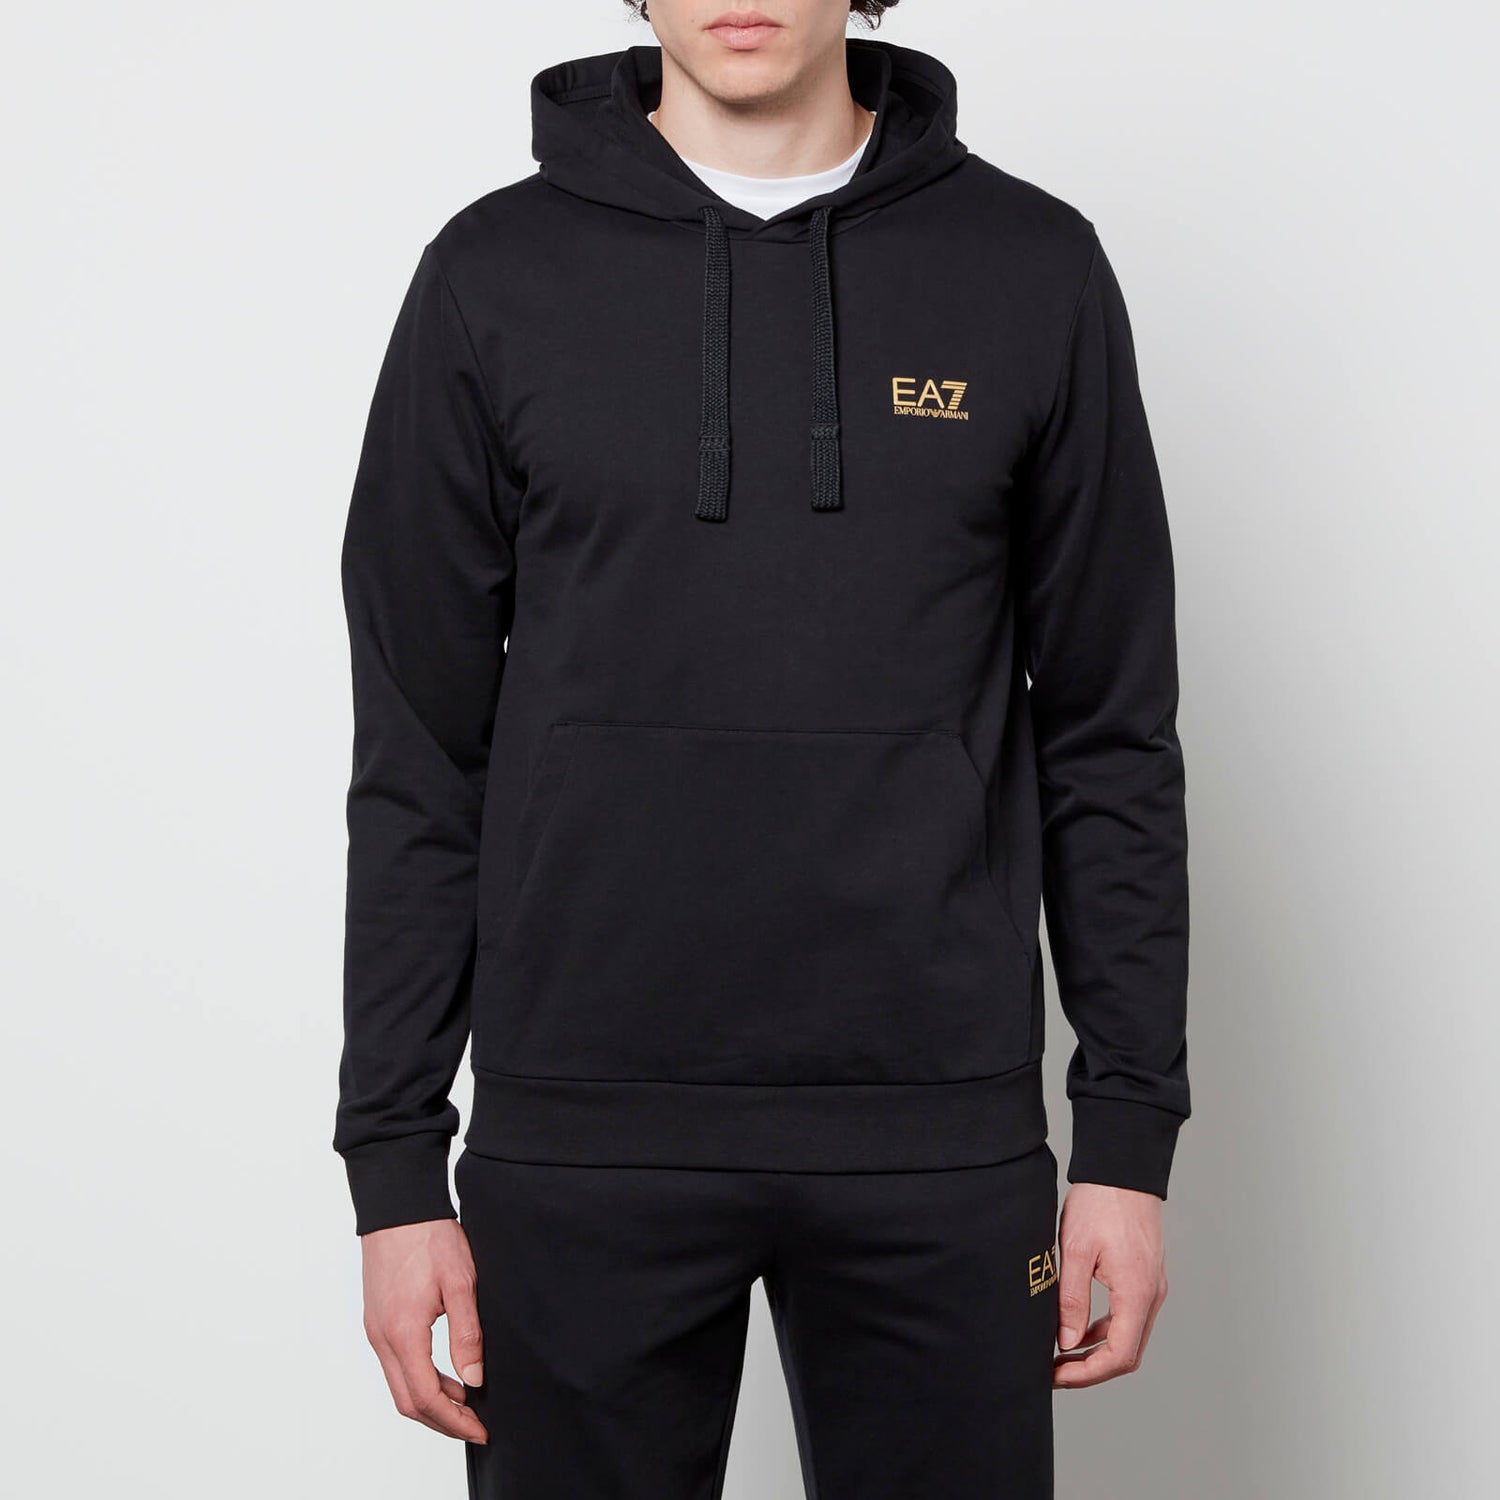 EA7 Men's Core Identity French Terry Hoodie - Black/Gold - M